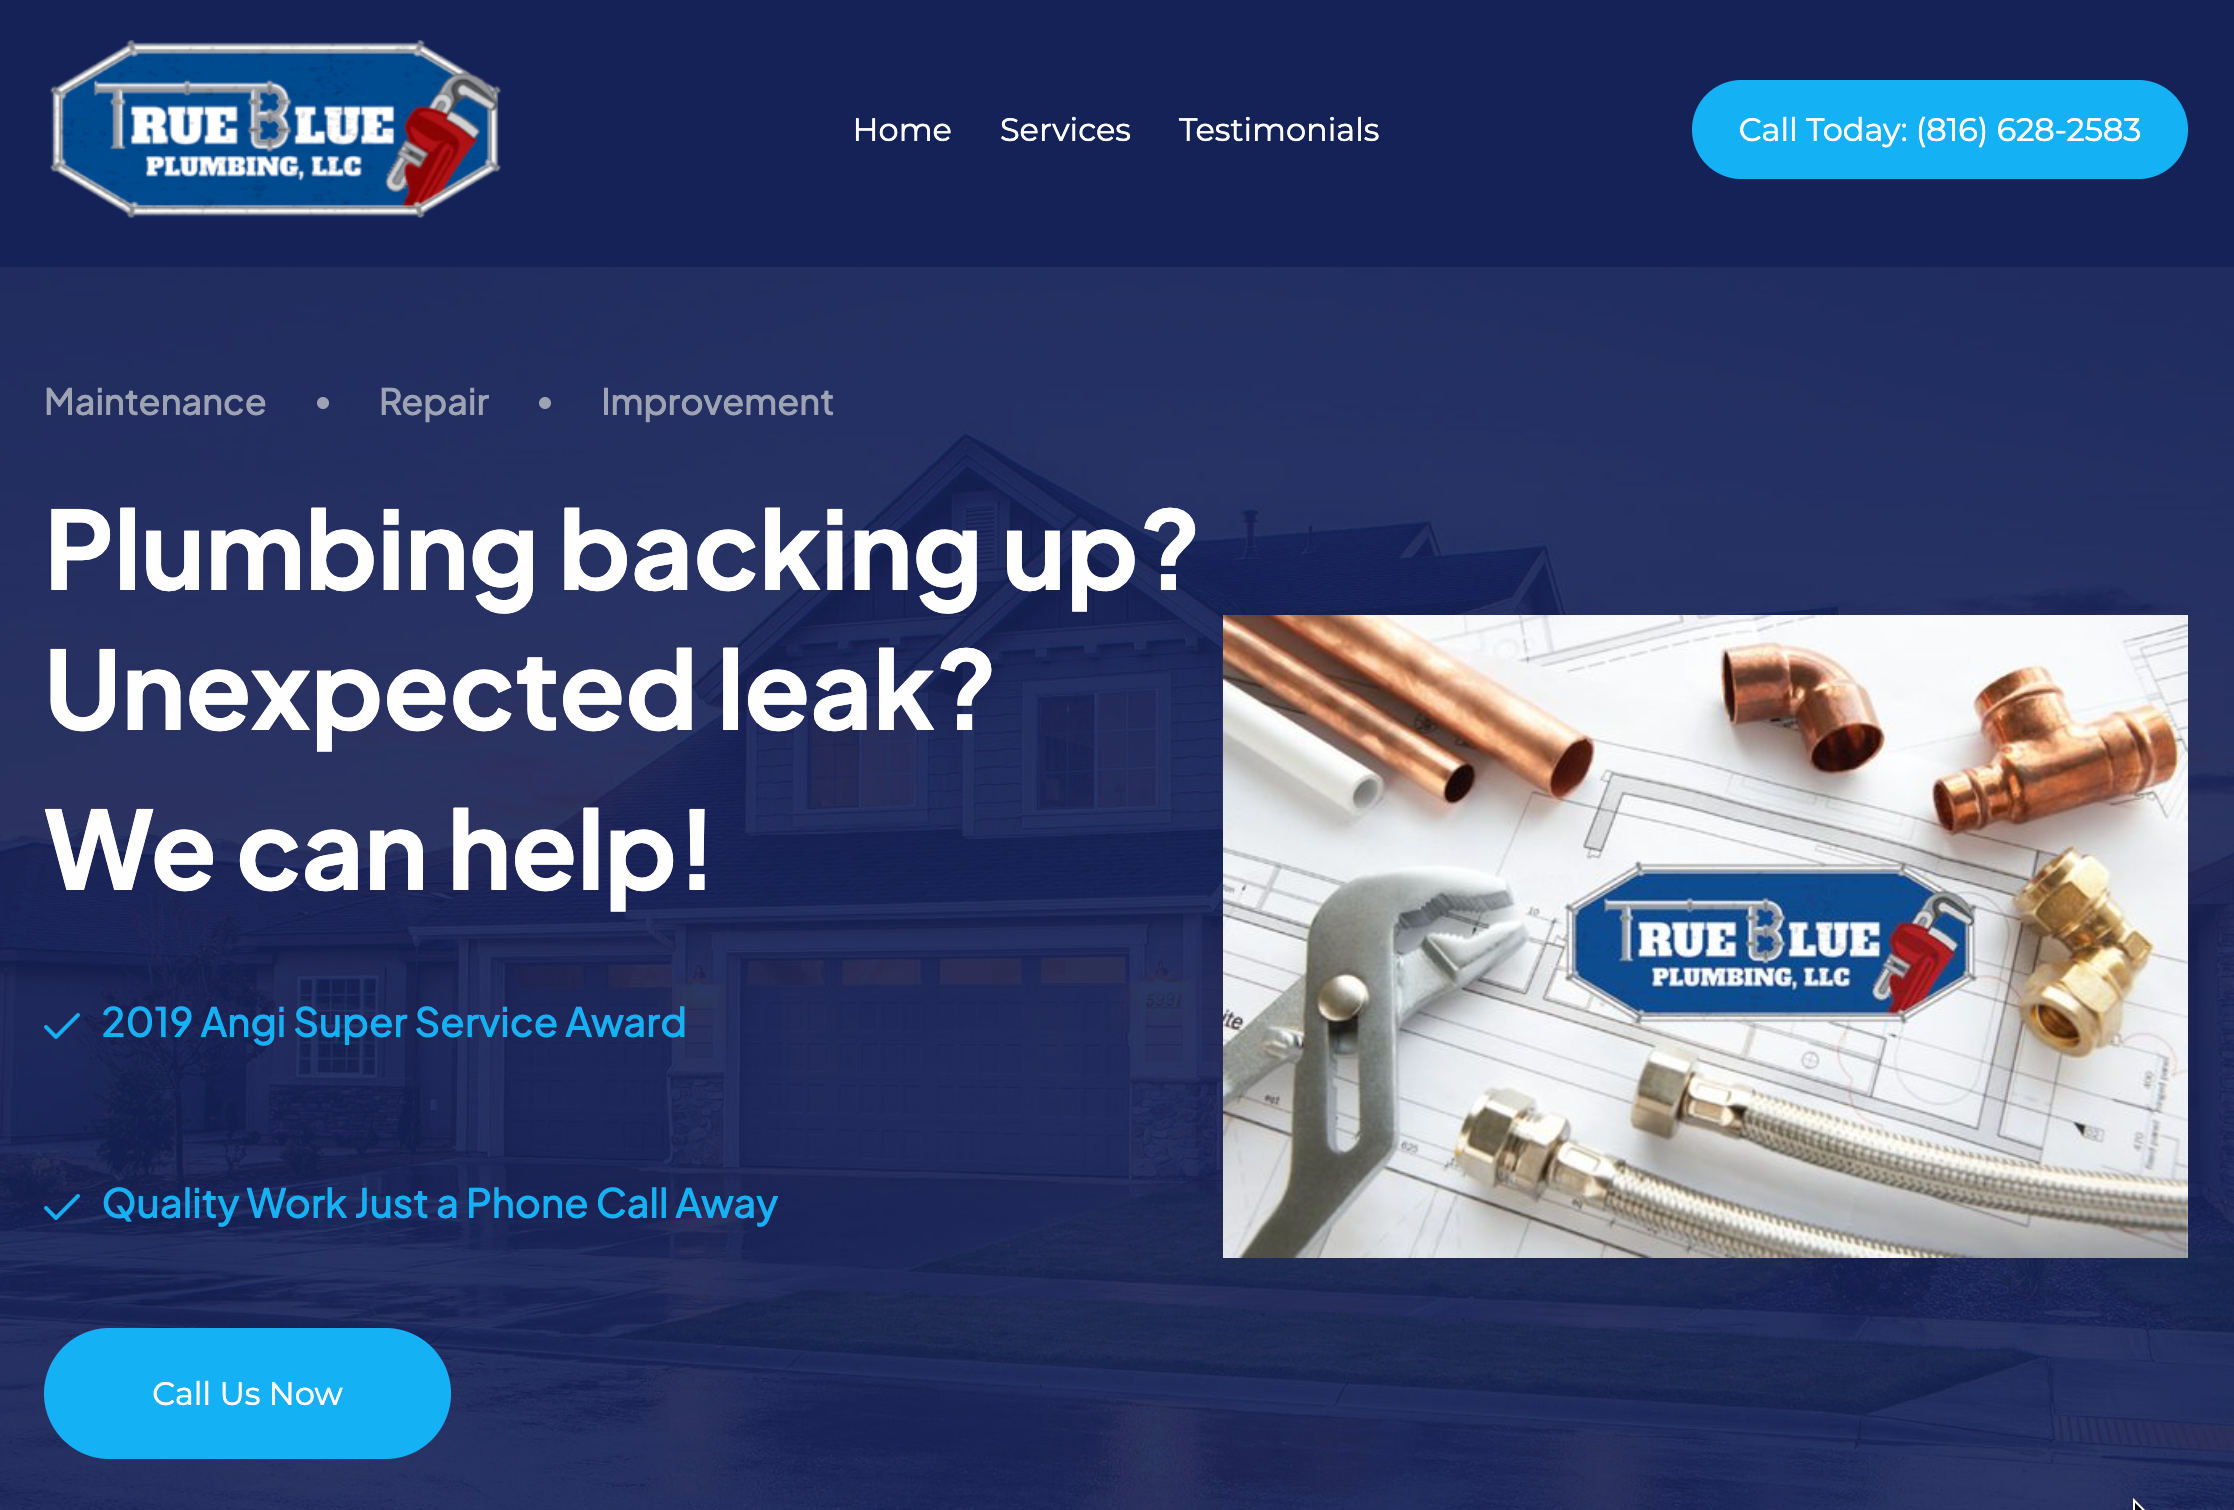 I was recently asked to rebuild a broken website for a local plumbing company, True...